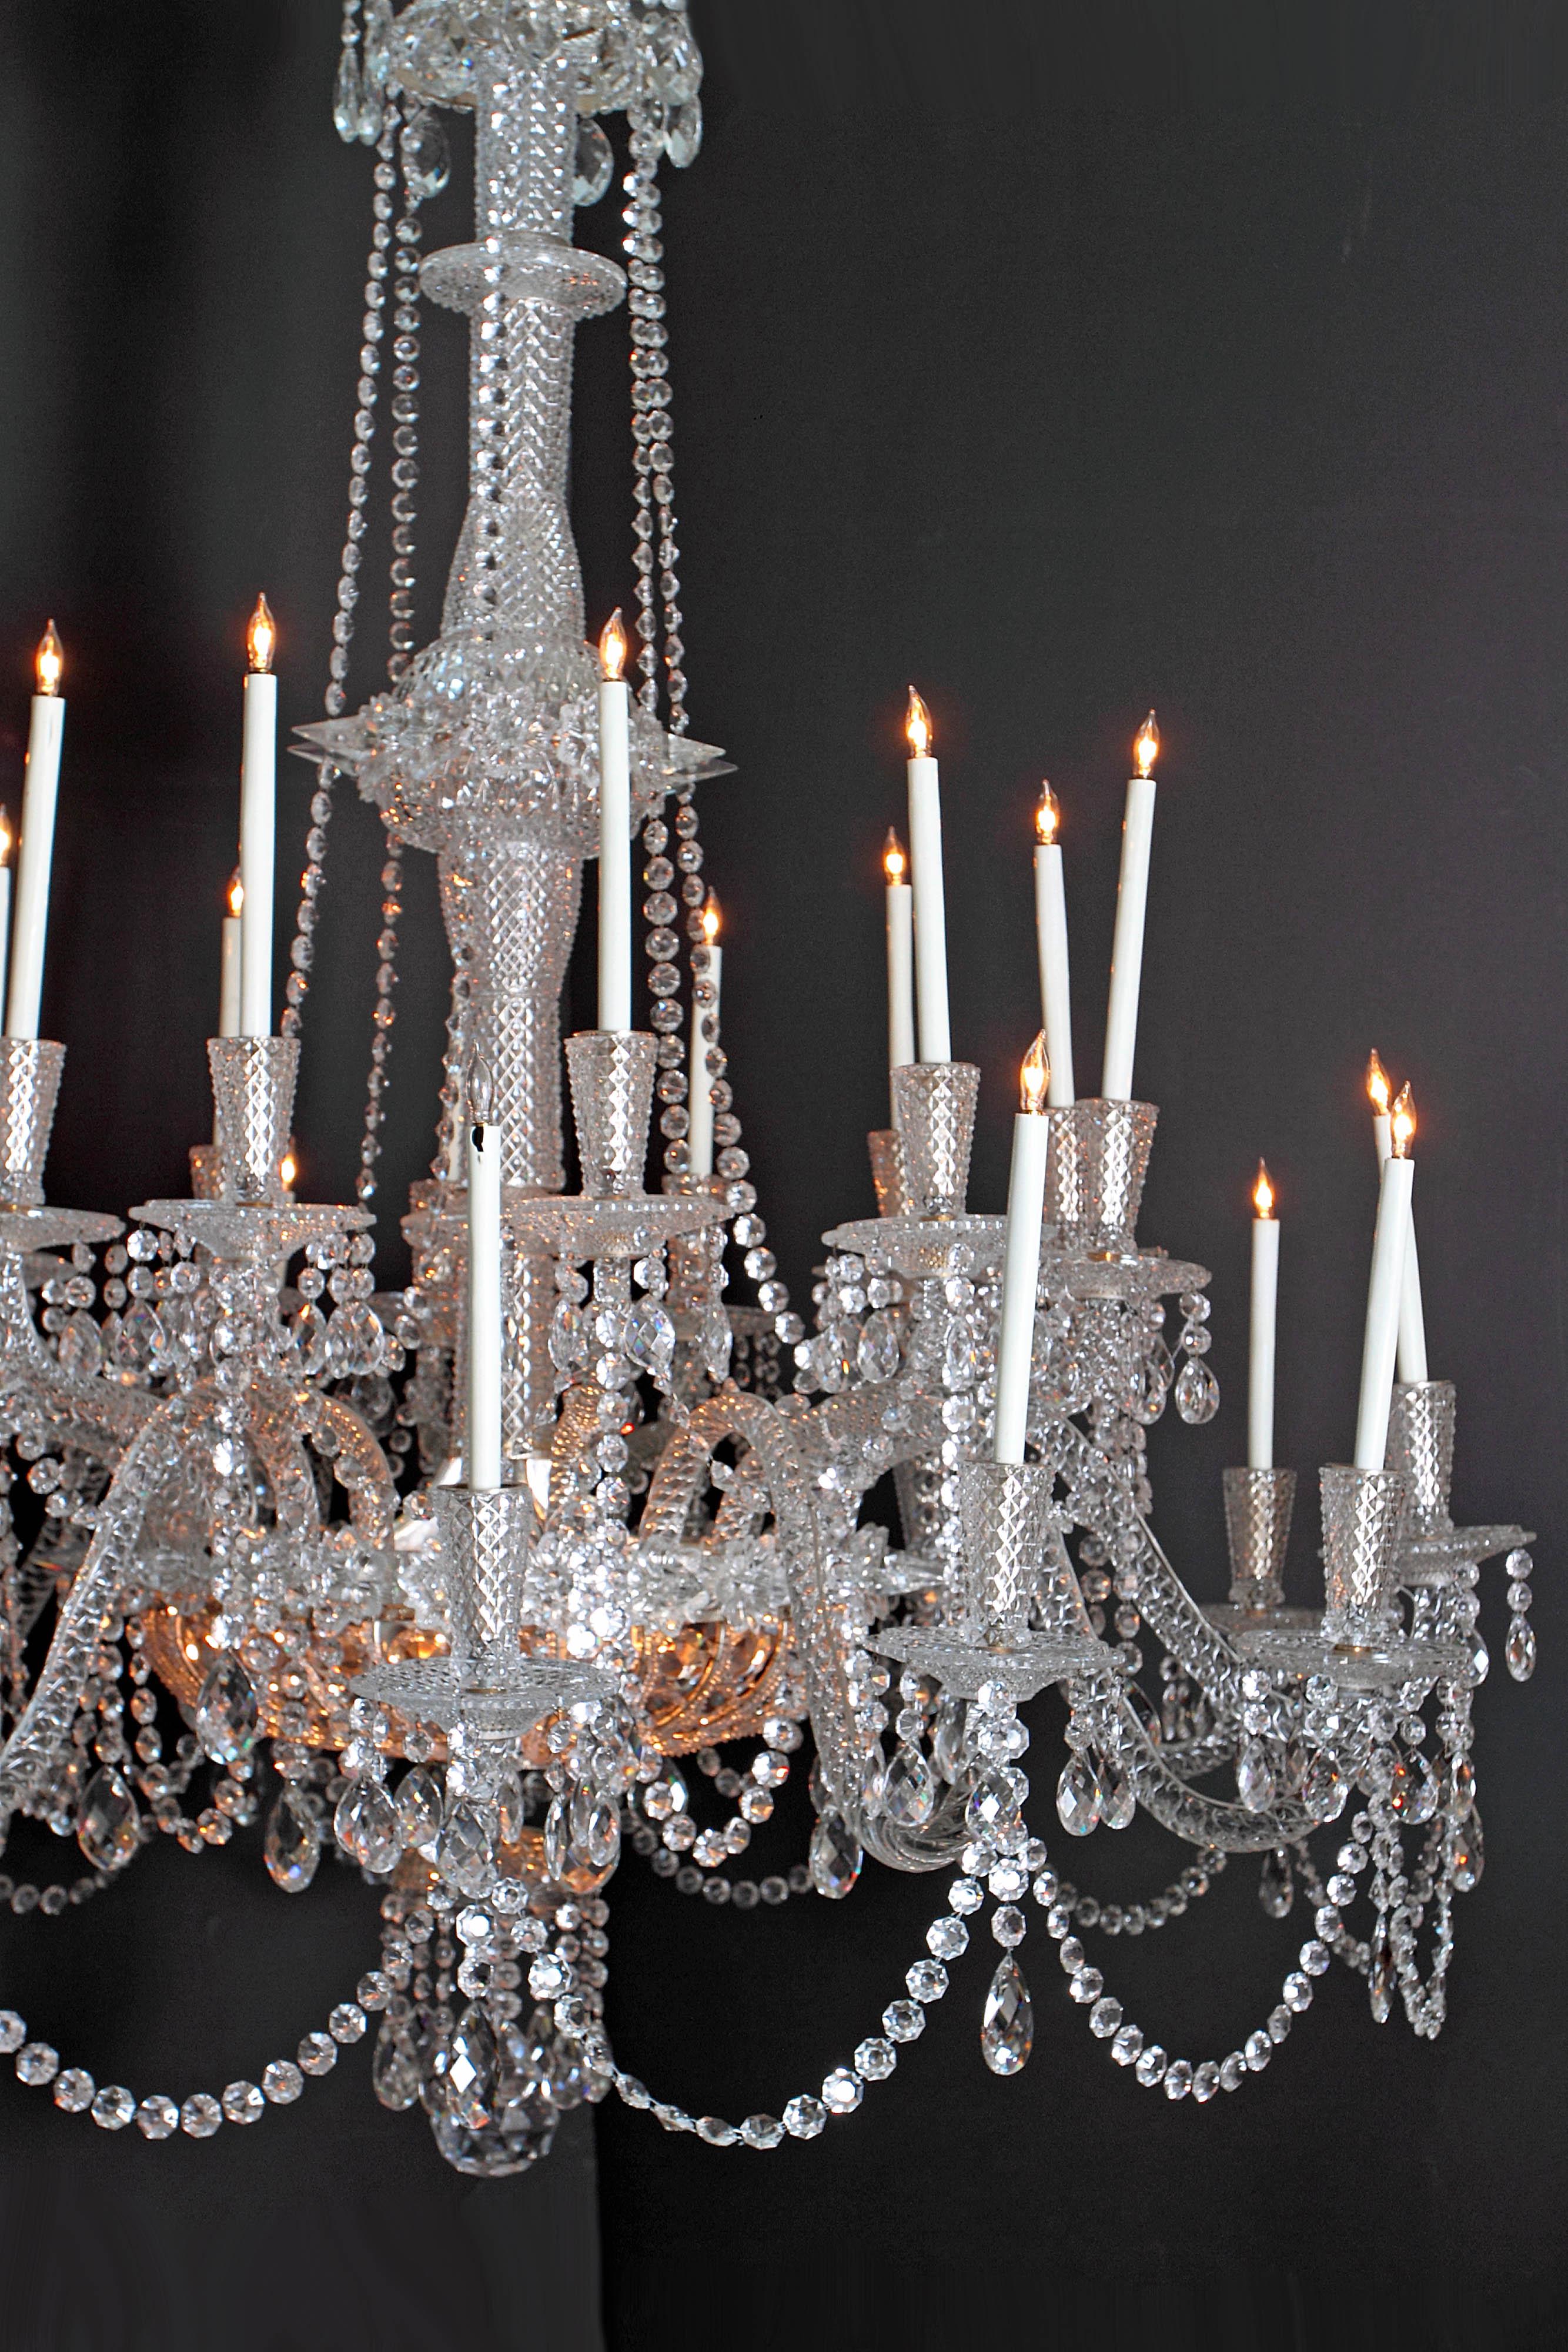 Pair of Grand Scale Mid-Victorian 24-Light Cut-Crystal Chandeliers For Sale 2